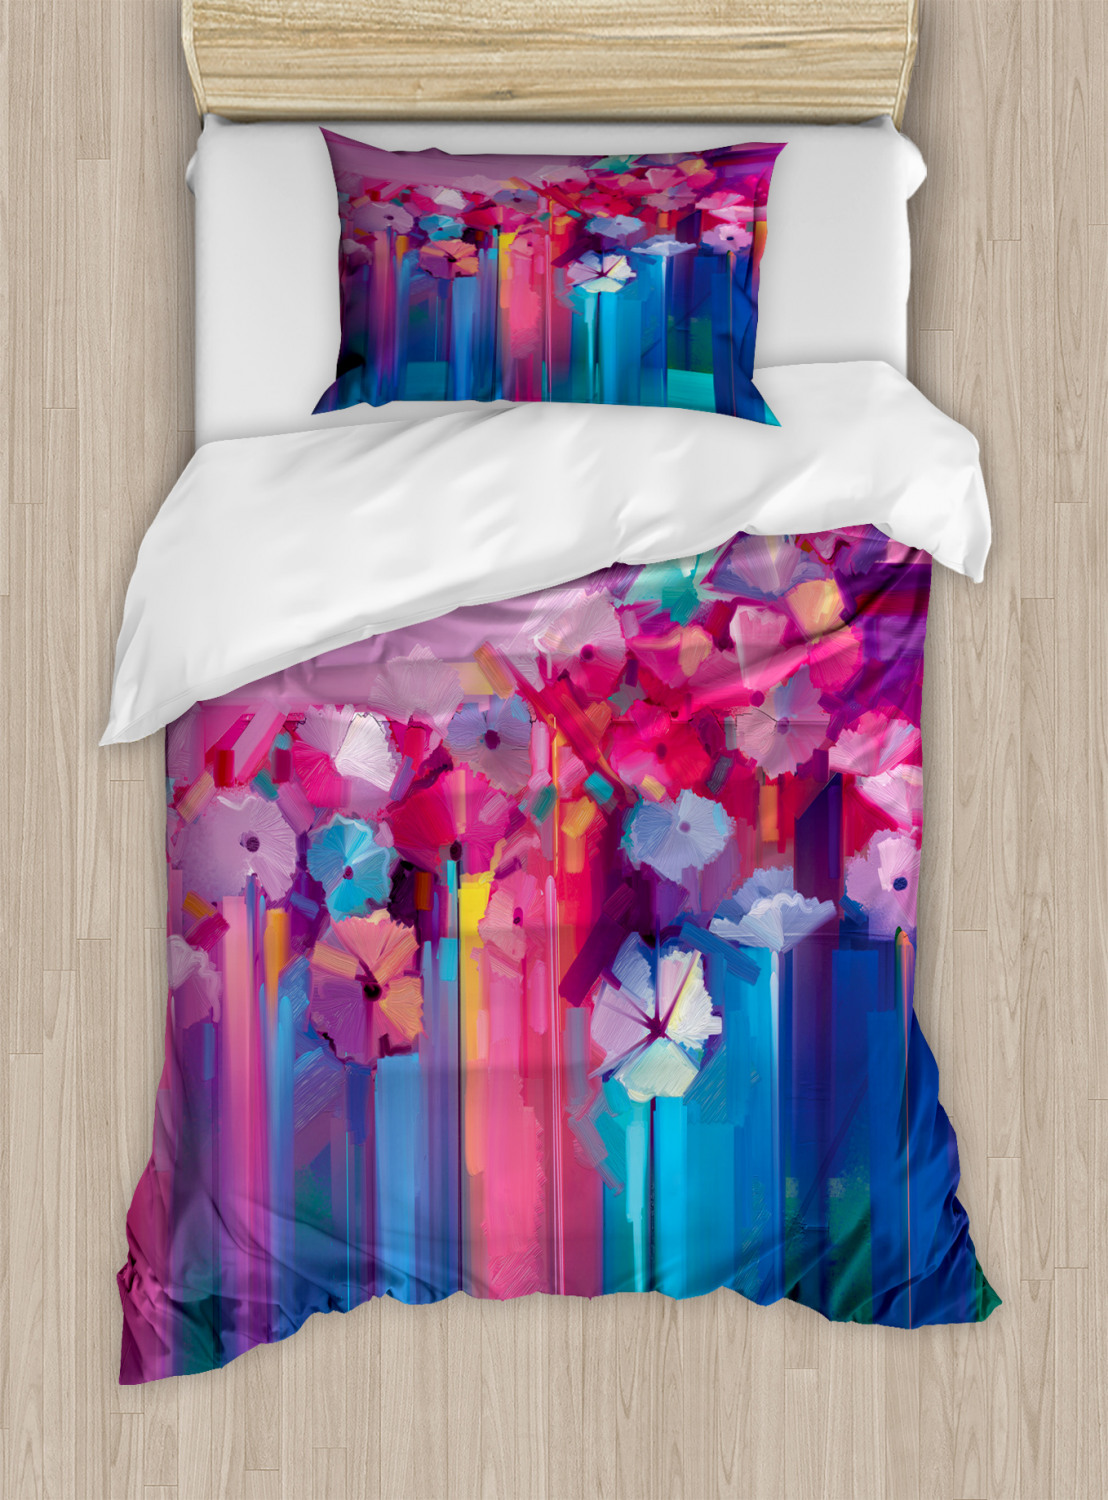 Gerber Daisy Duvet Cover Set, Artistic Oil Painting Print with Abstract